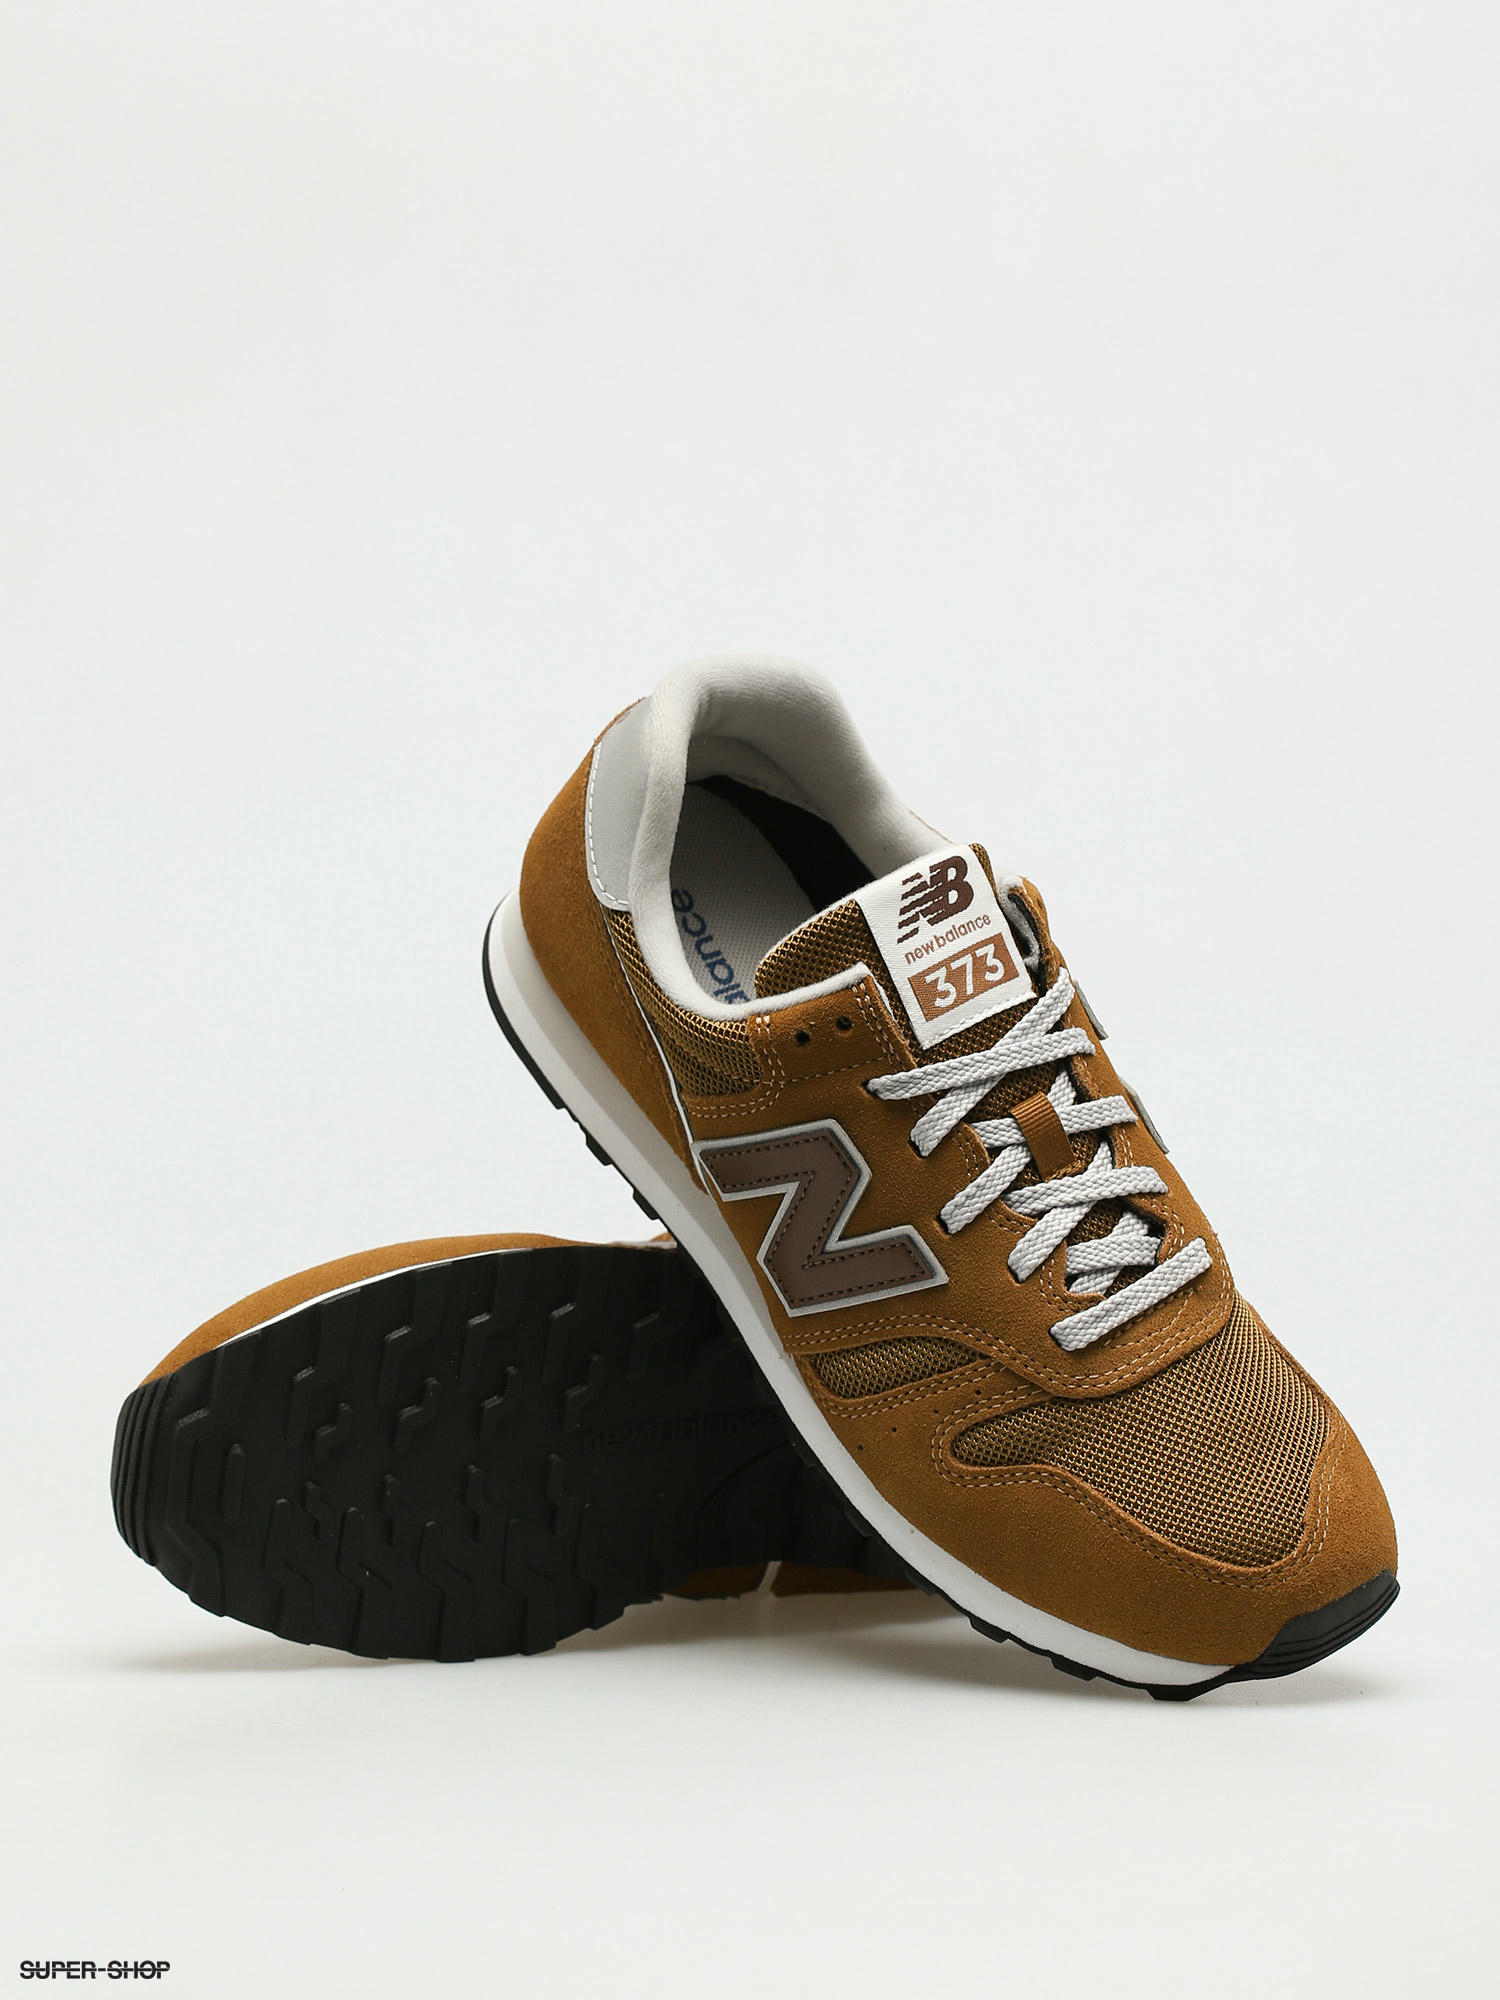 1280297 new balance 373 shoes brown